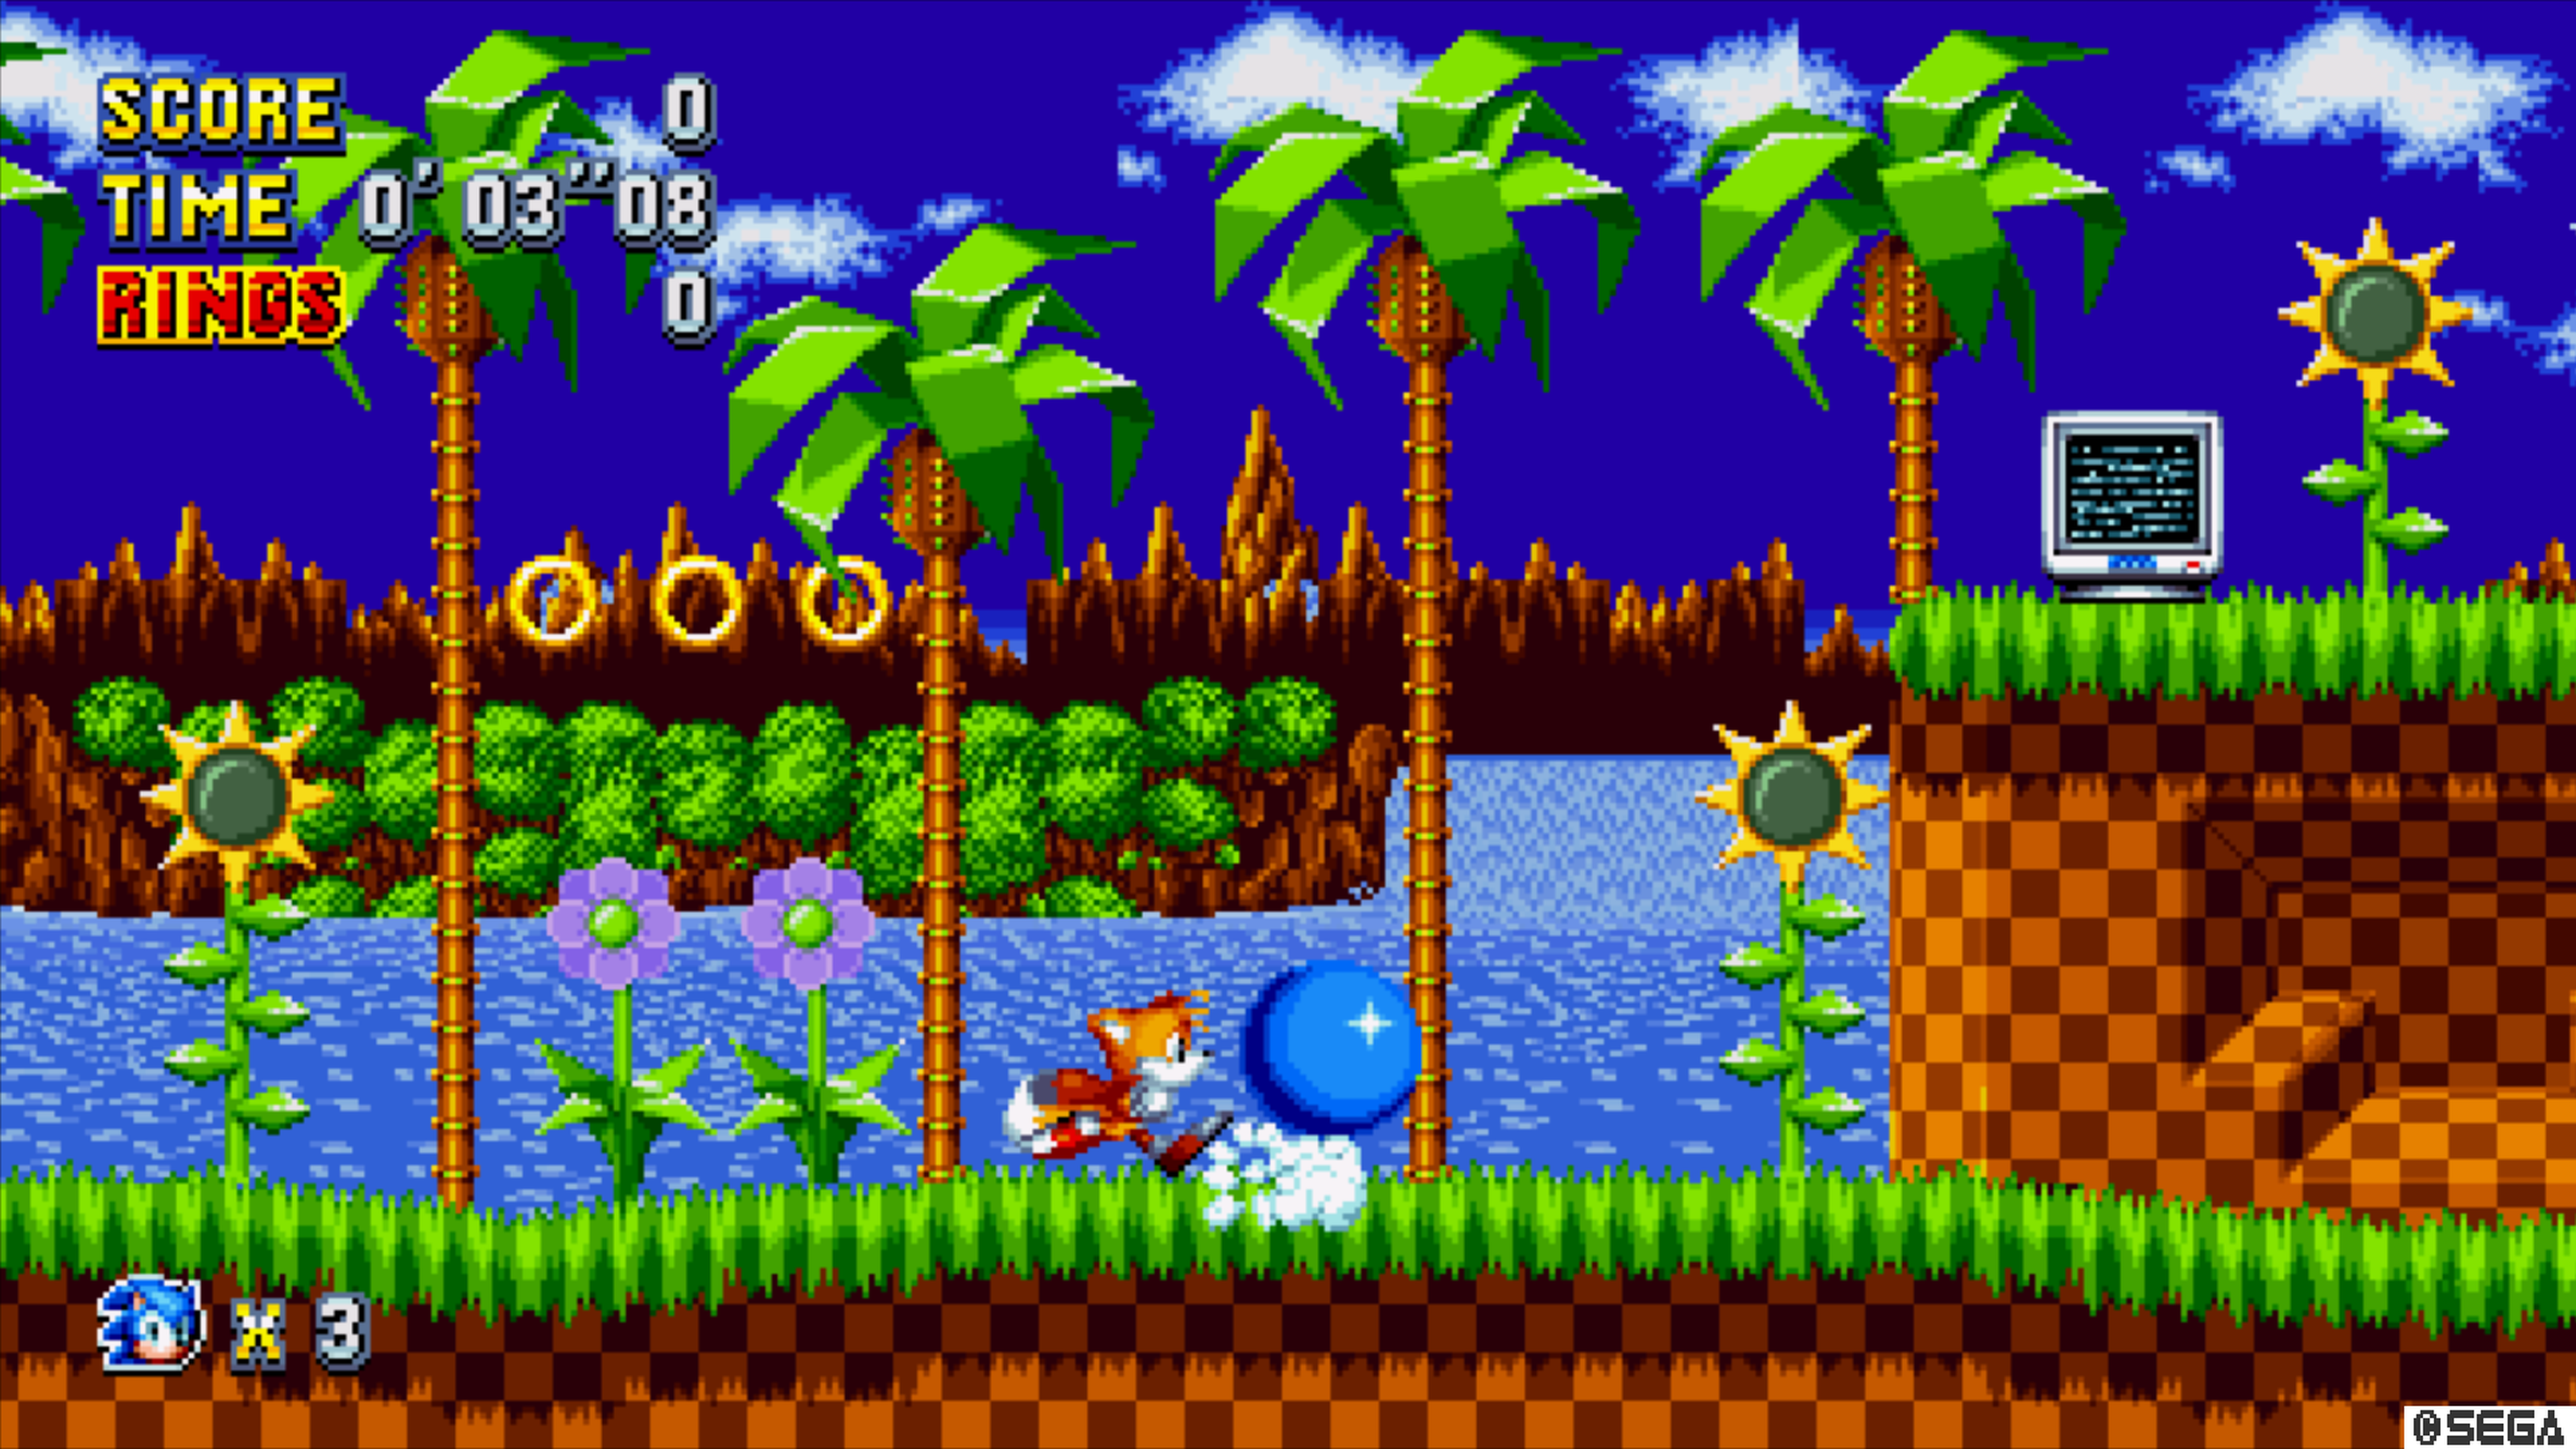 sonicmania_20170821003uy4h.png